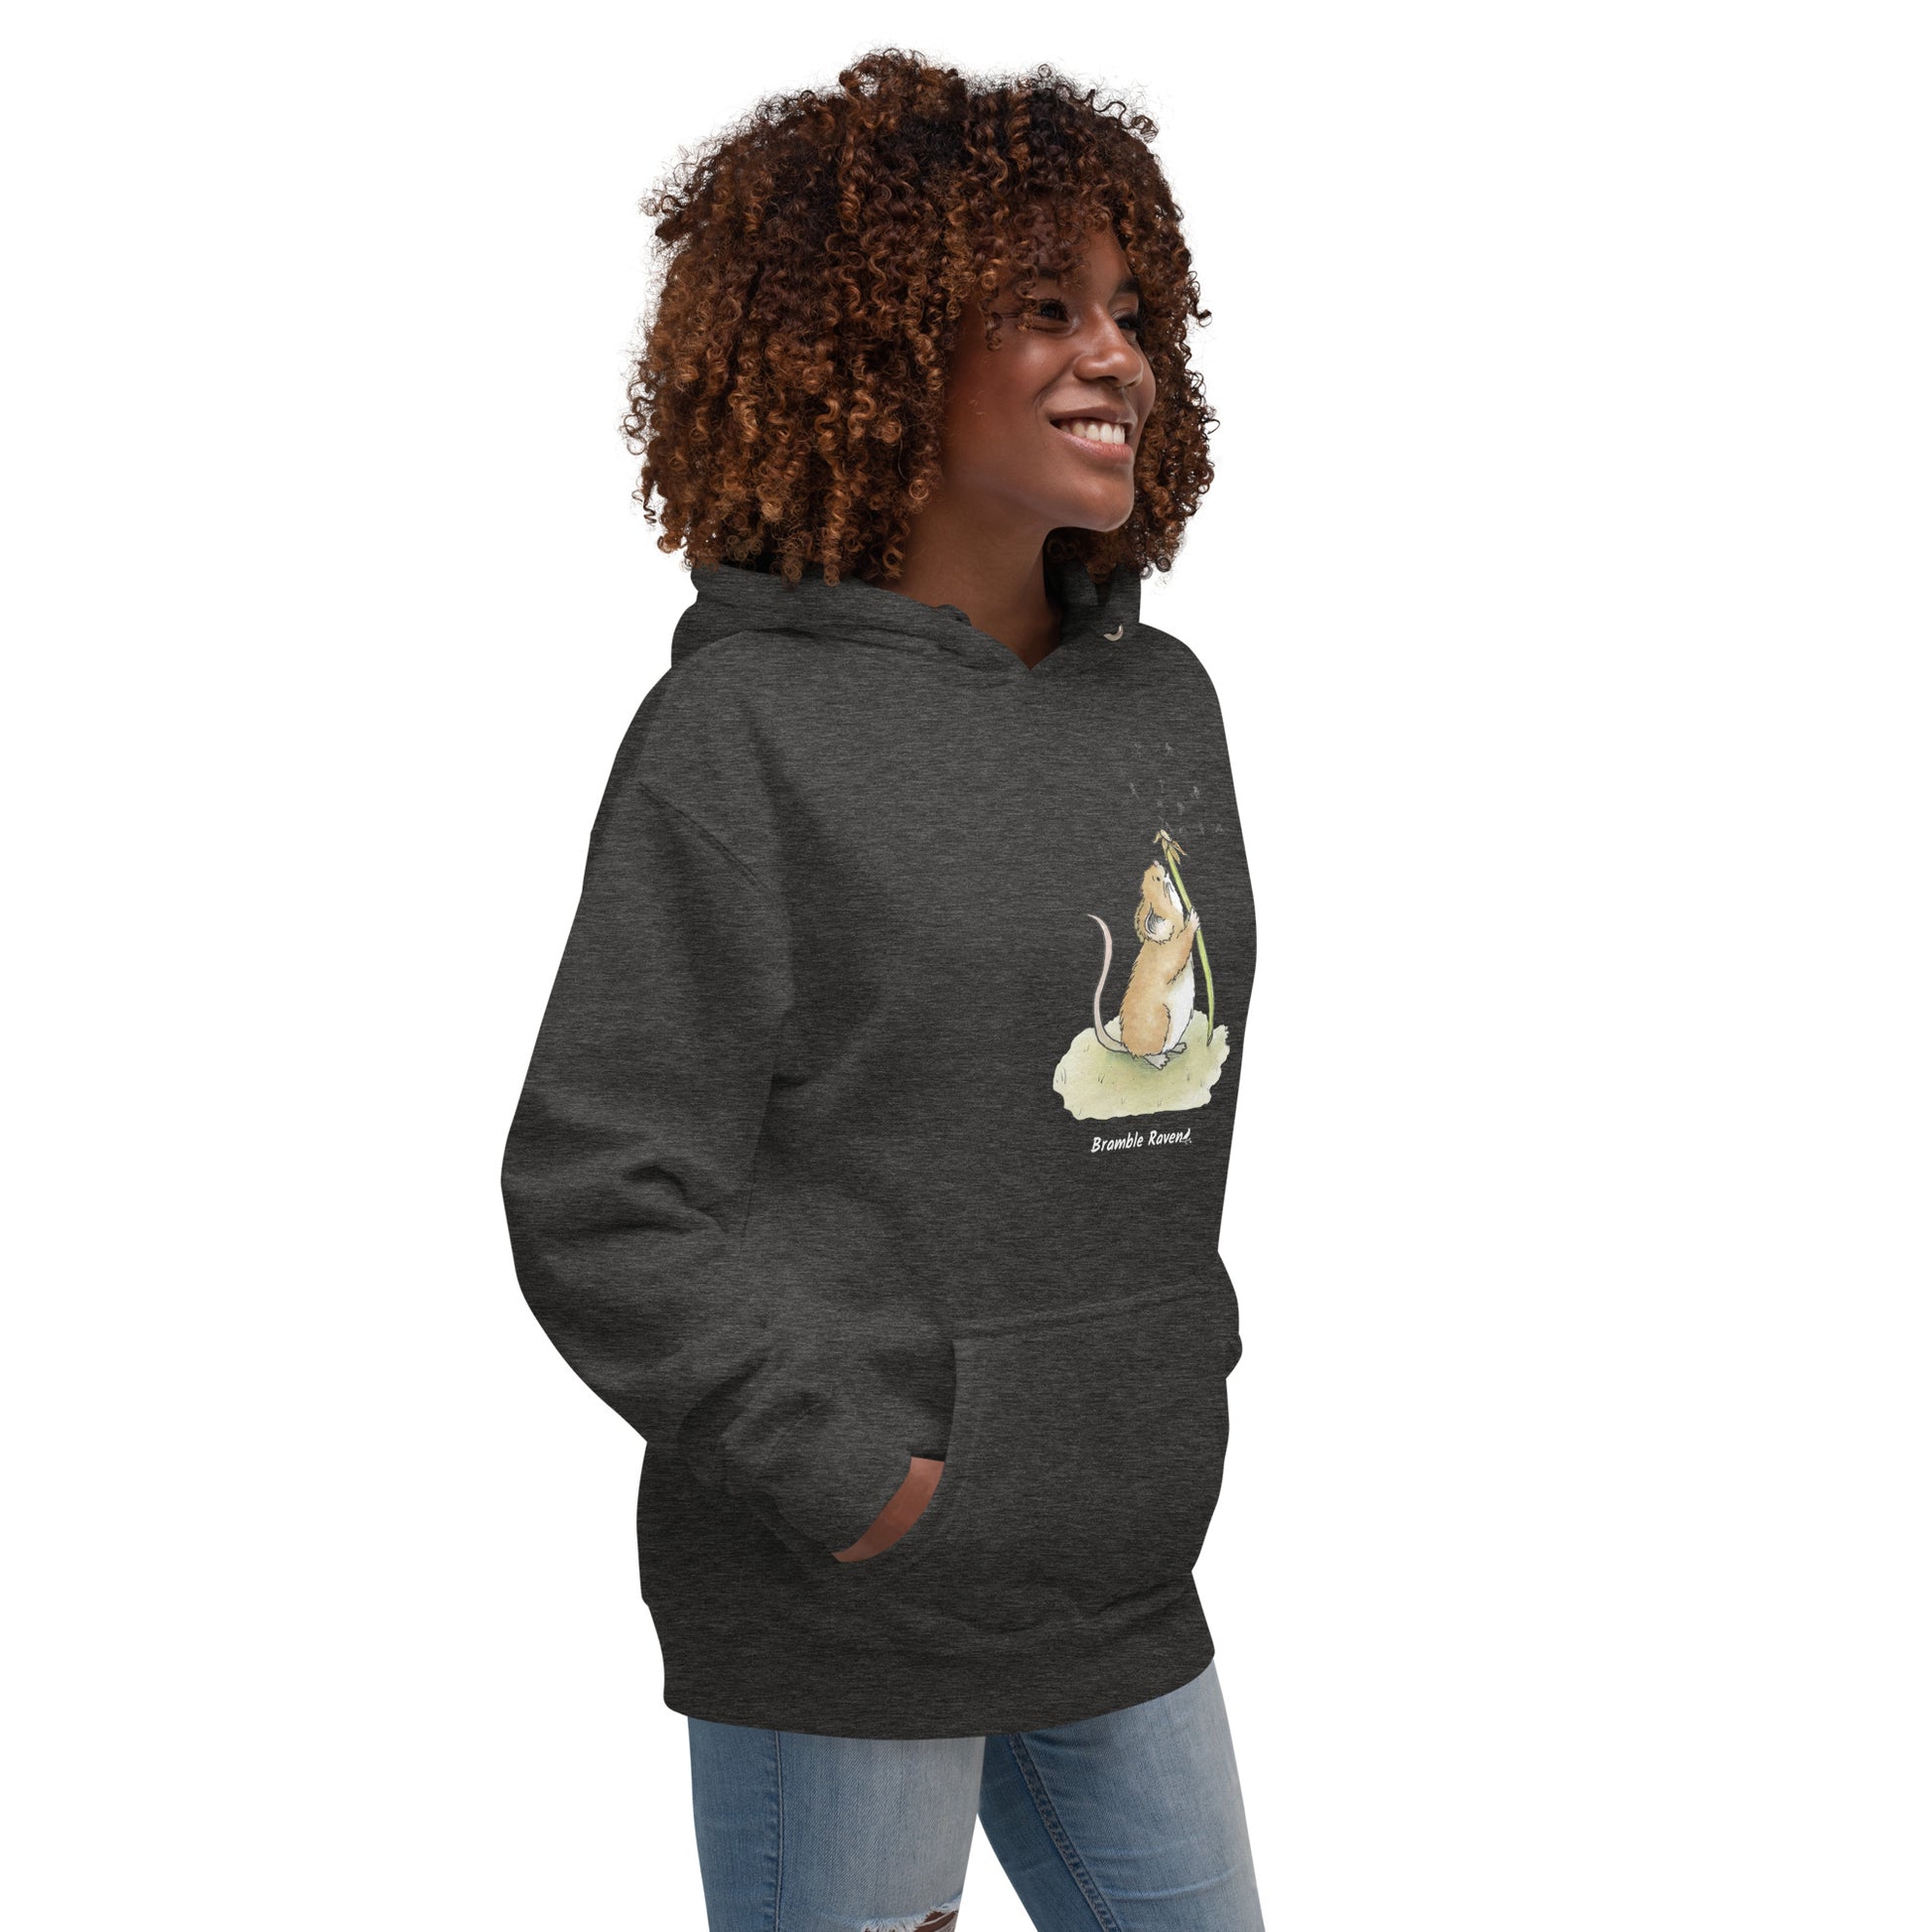 Original Dandelion wish design of cute watercolor mouse blowing dandelion seeds  featured on unisex charcoal heather gray  colored hoodie shown on female model